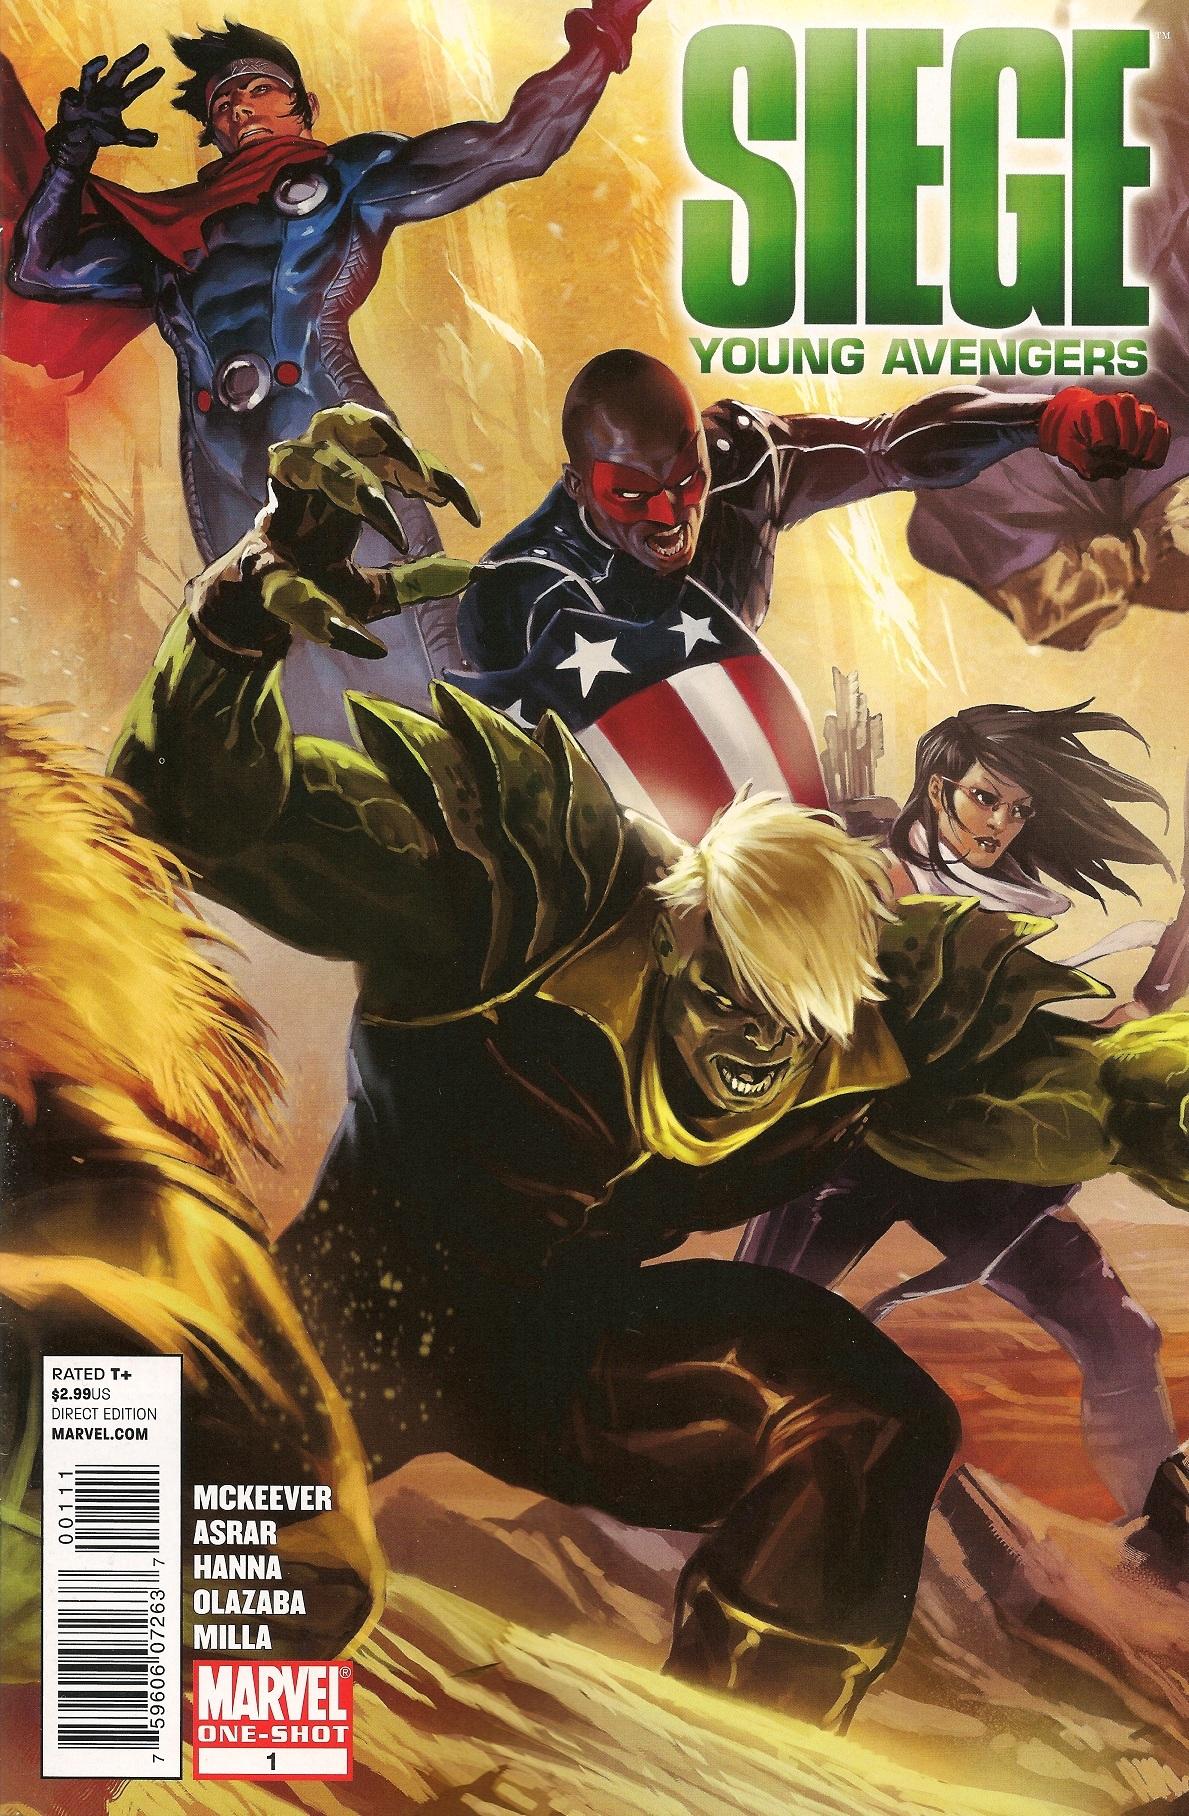 Siege: Young Avengers Vol. 1 #1